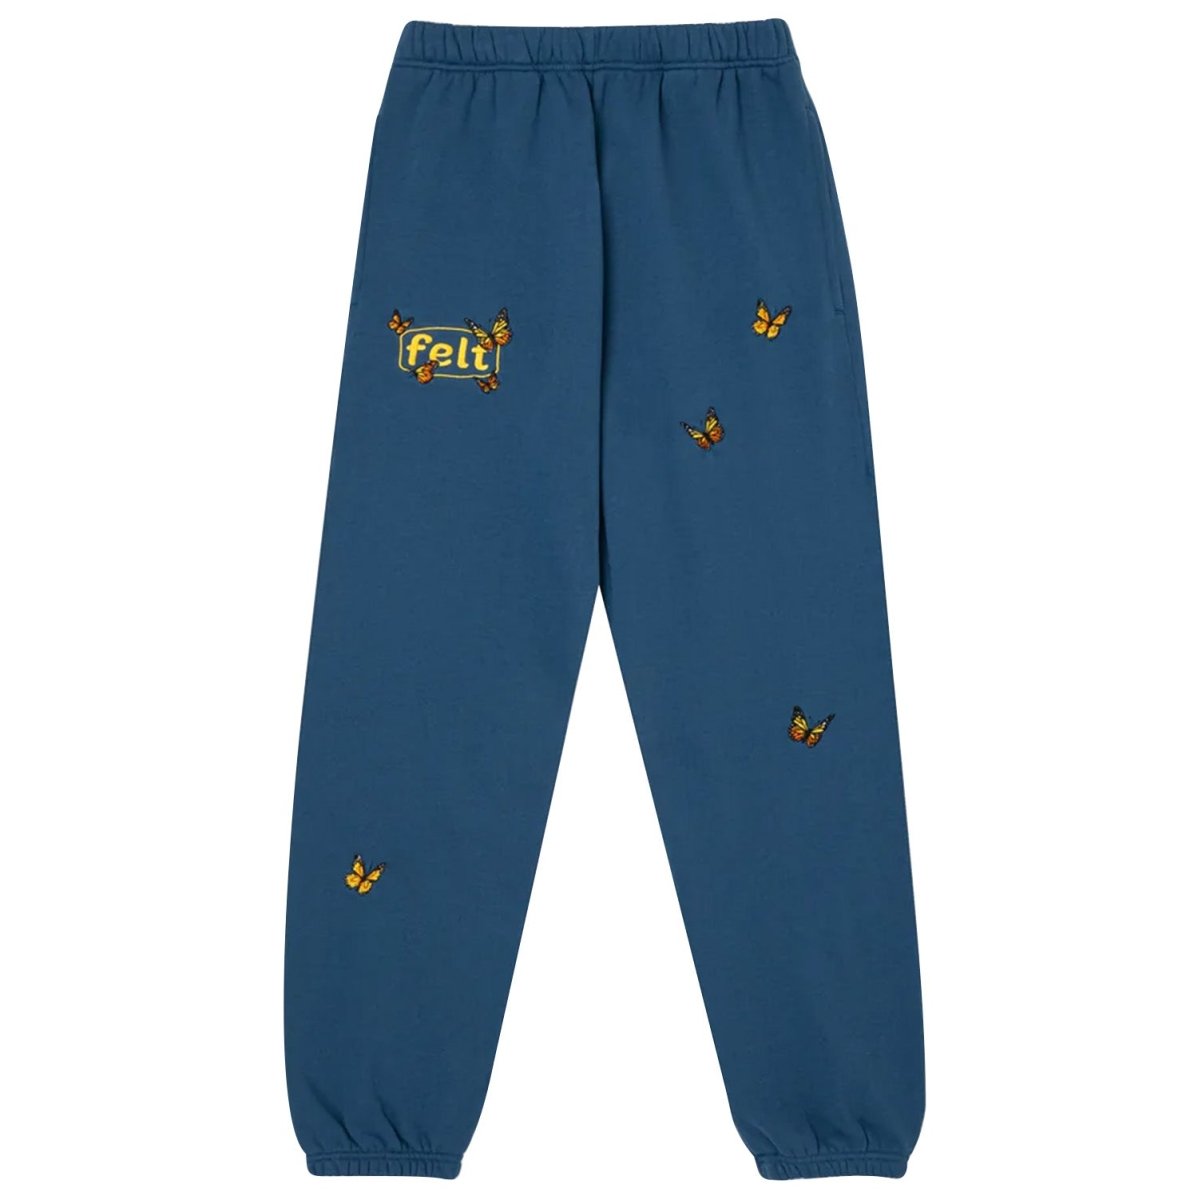 Felt Butterfly Pant Stone Blue - 10032278 - West NYC